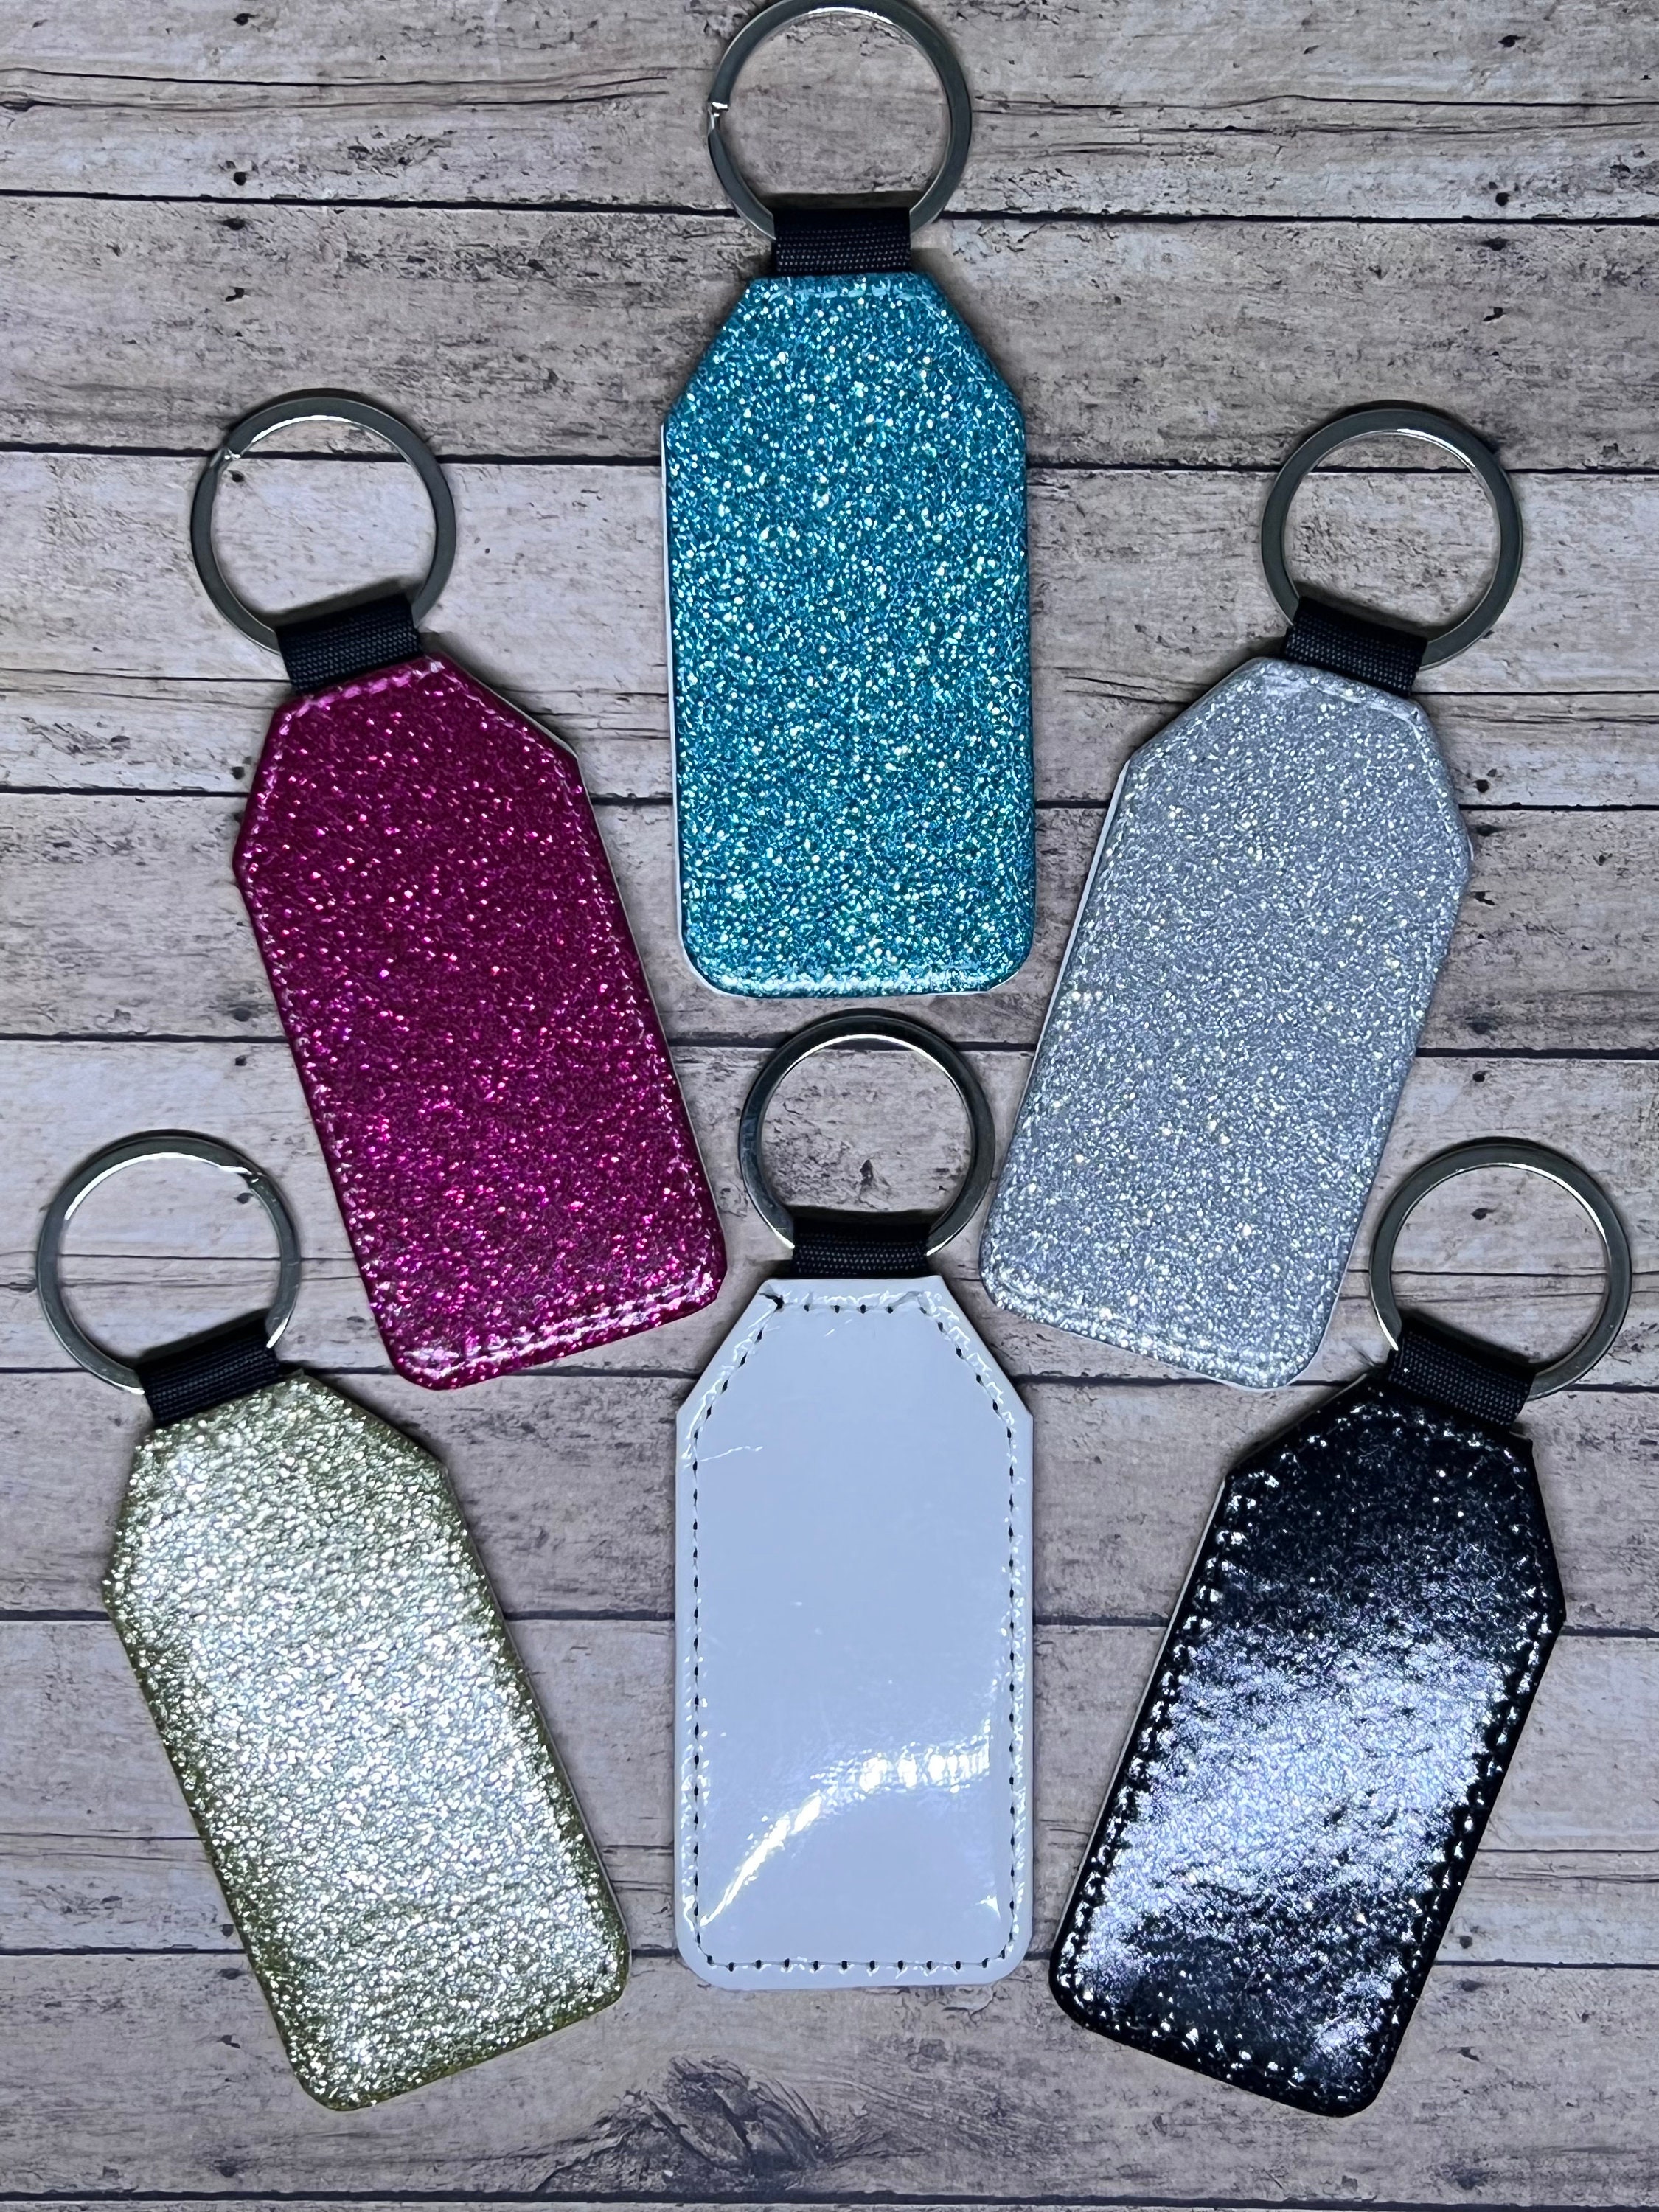 Sublimation Leather Key Chain